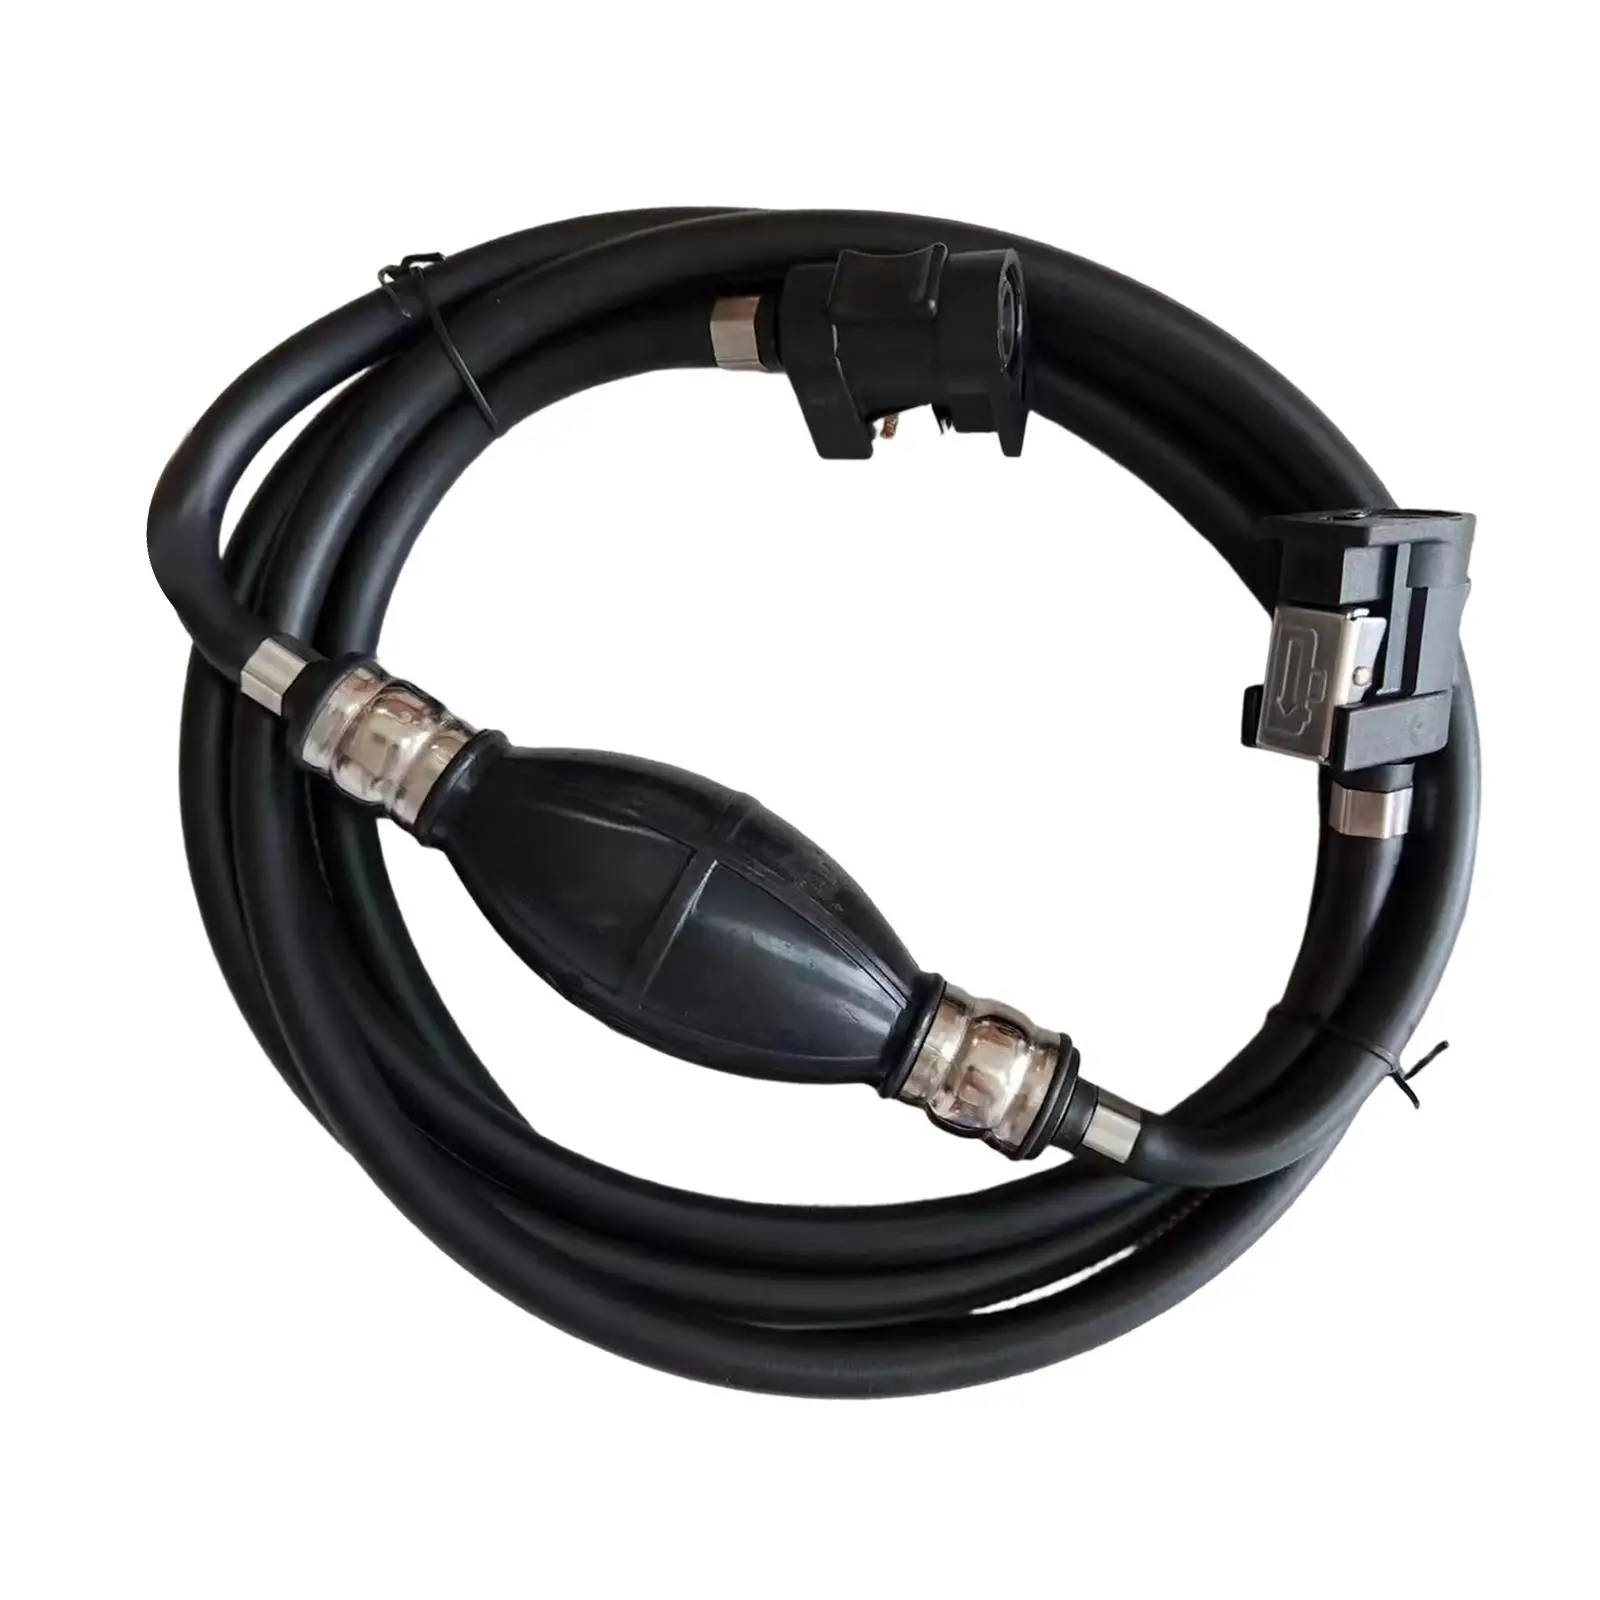 Fuel Gas Line Hose 3Meter Long Rubber Steel Hose Clamps with Primer Bulb Replace Parts for Yamaha Outboard Boat Motor